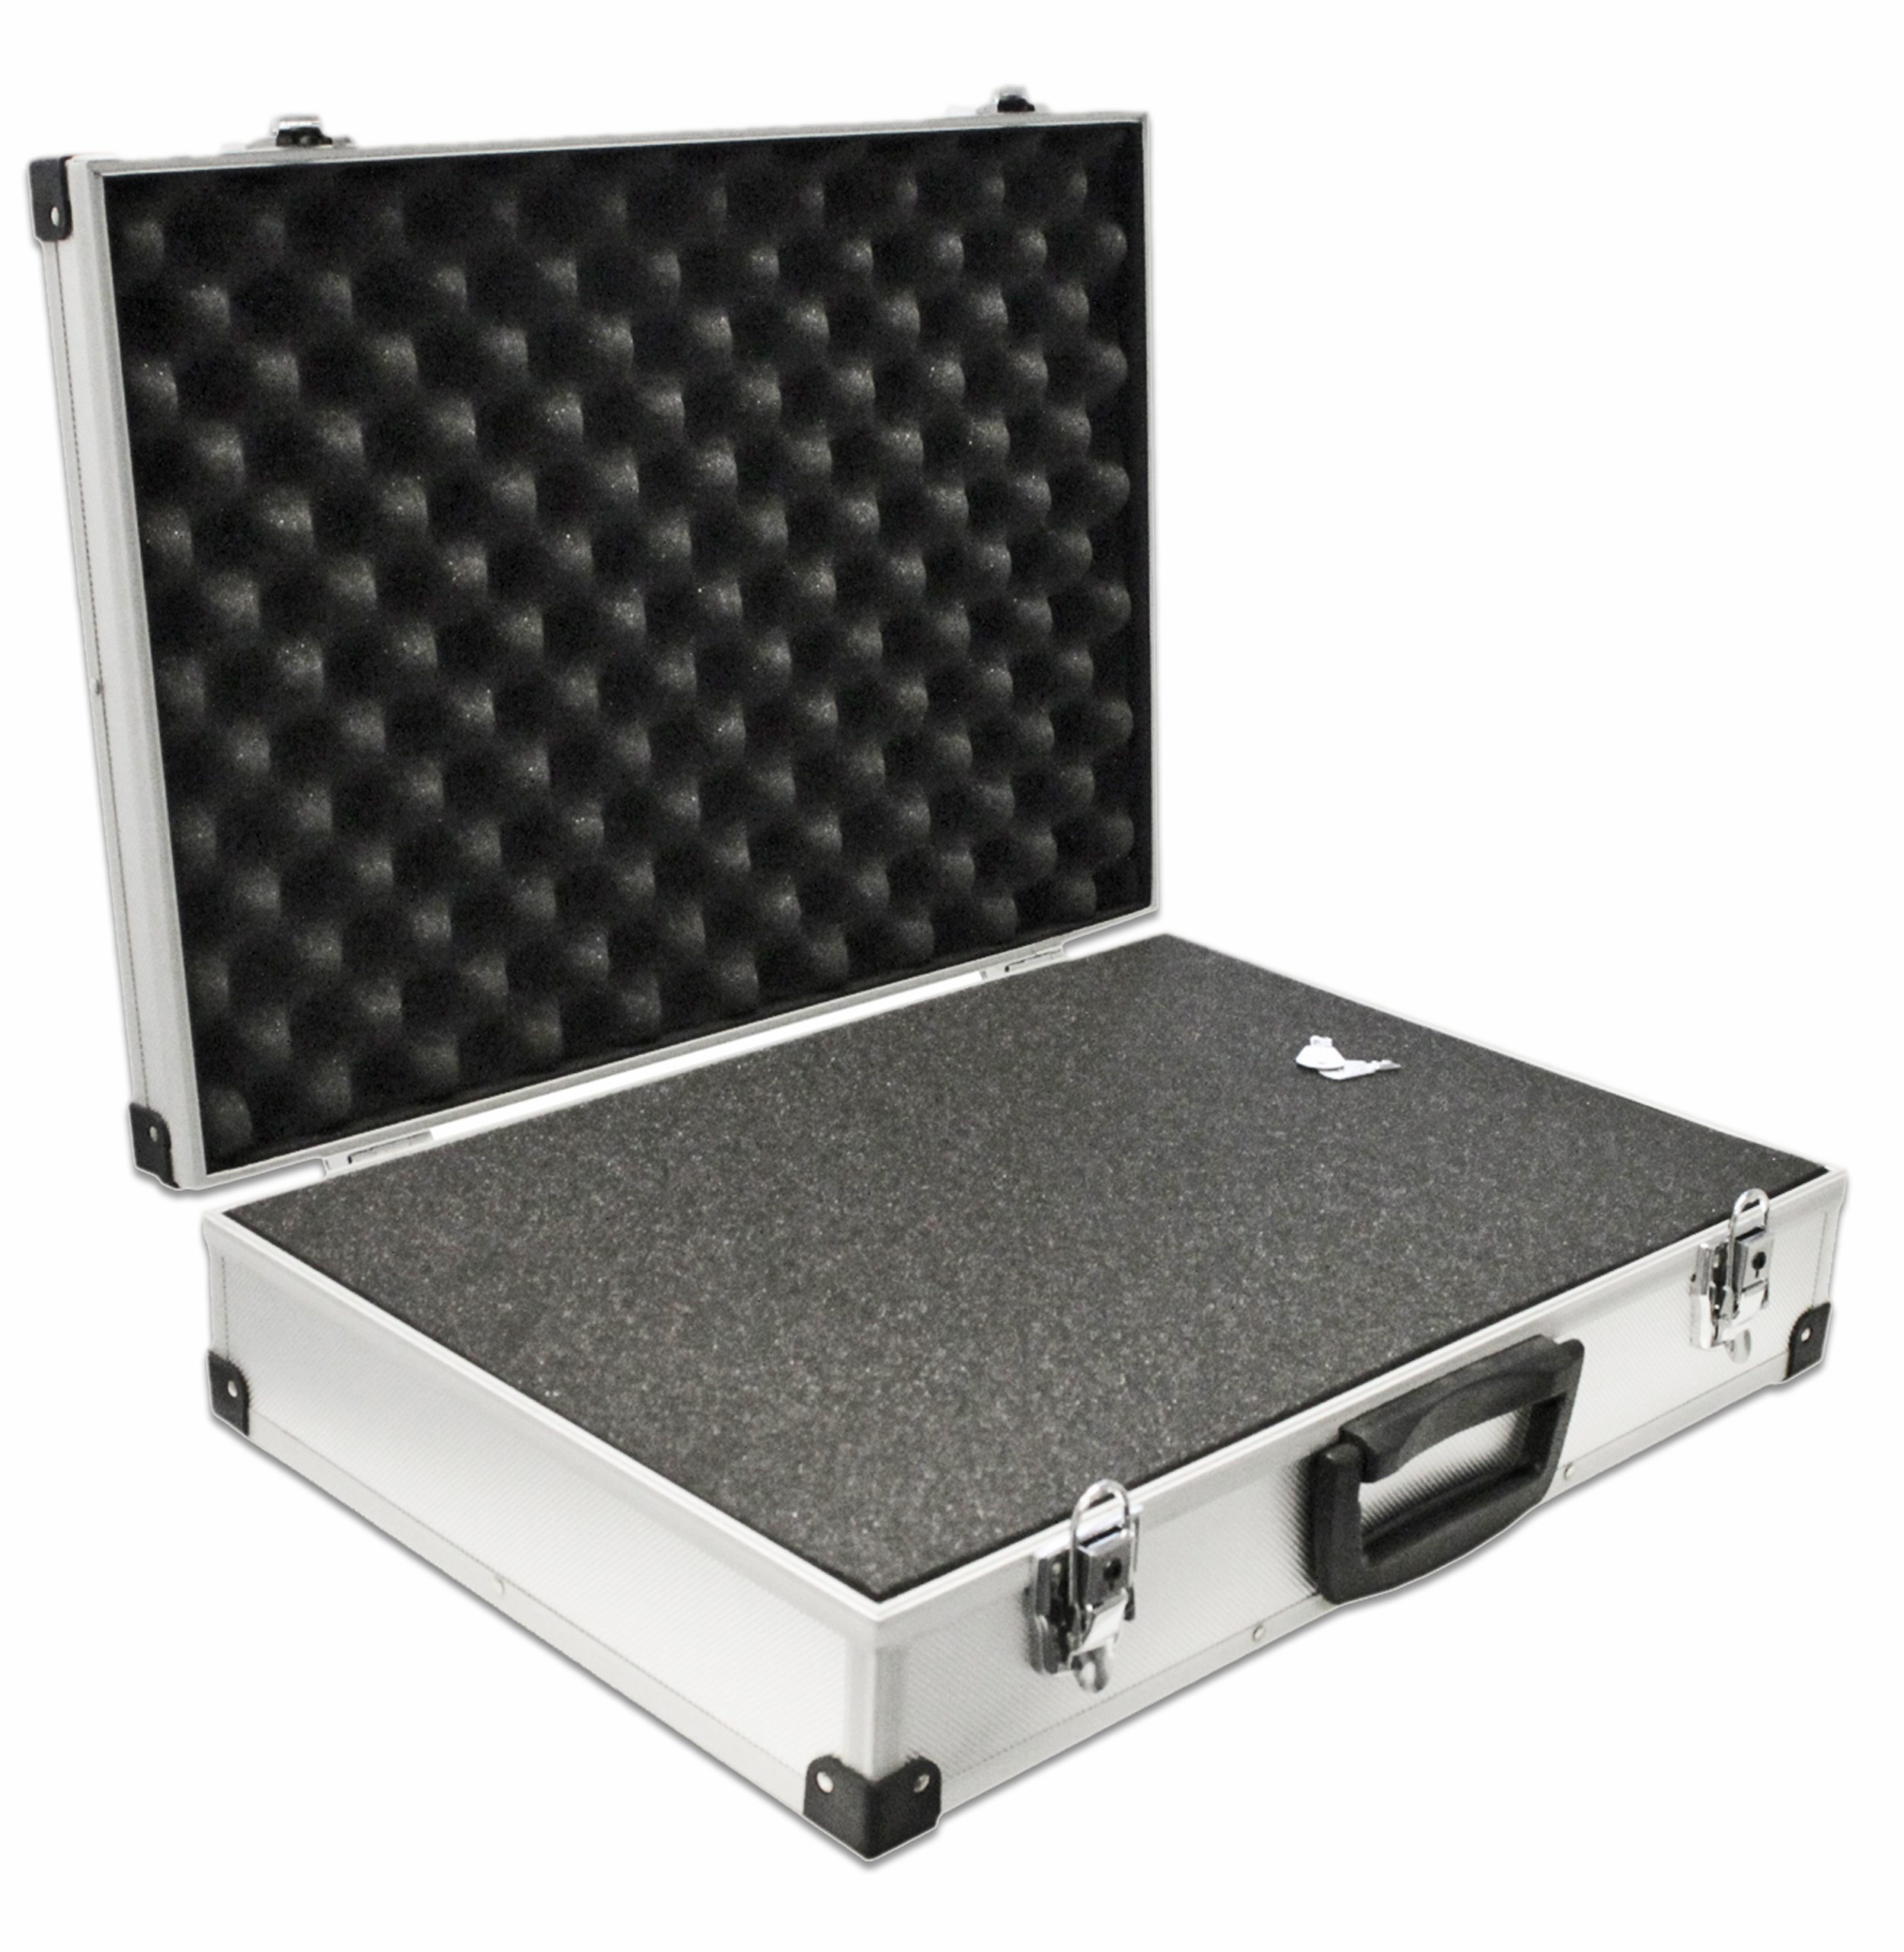 «PeakTech® P 7270» Carrying Case for Measurement Instruments